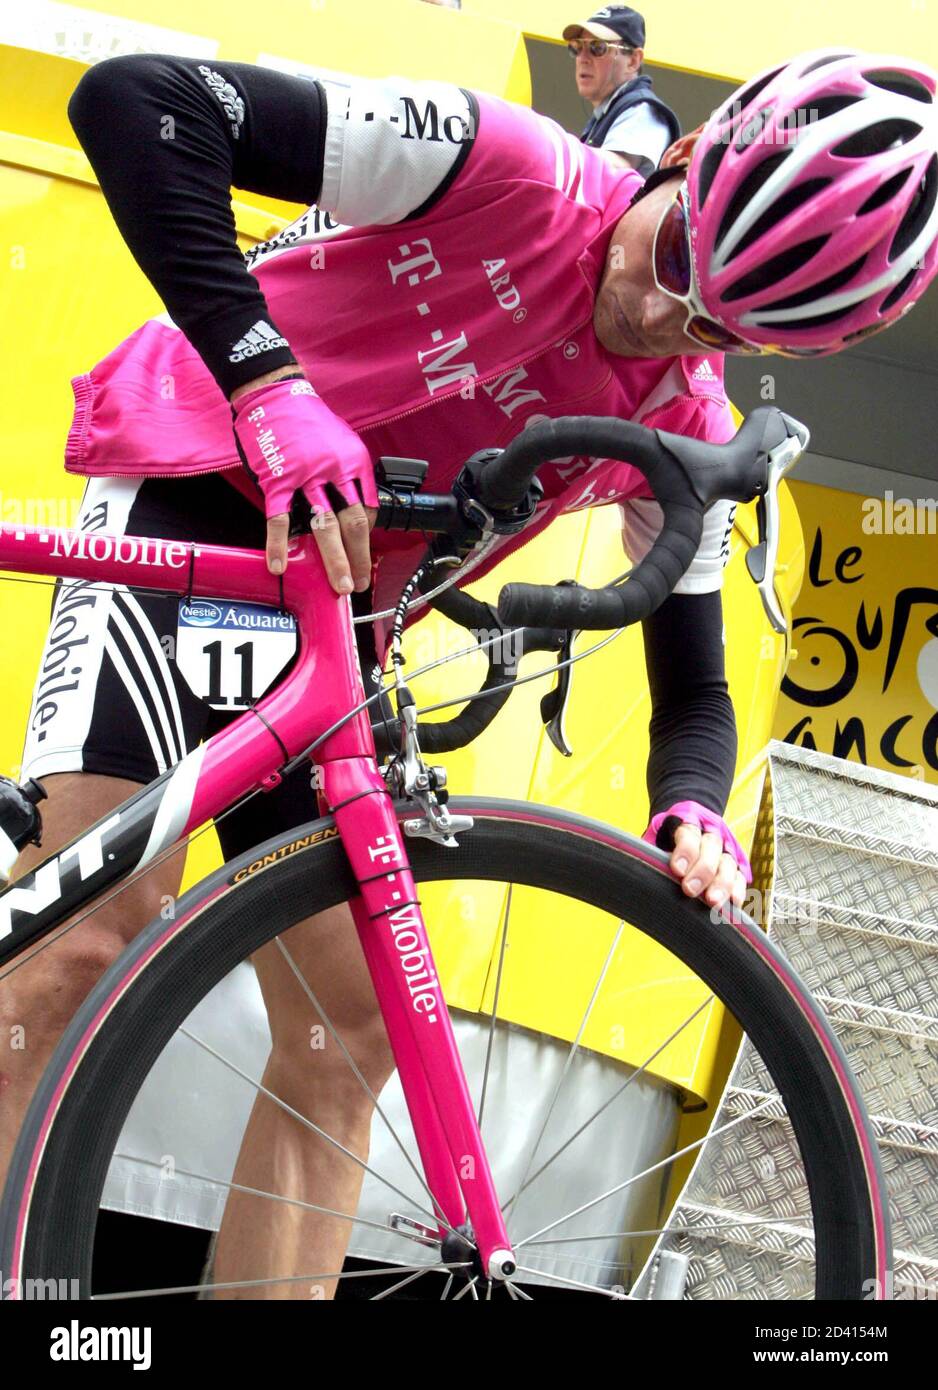 T-Mobile team rider Jan Ullrich of Germany checks his bike before the start of the 160.5 km long ninth stage of the Tour de France from St.-Leonard-de-Noblat to Gueret, July 13,